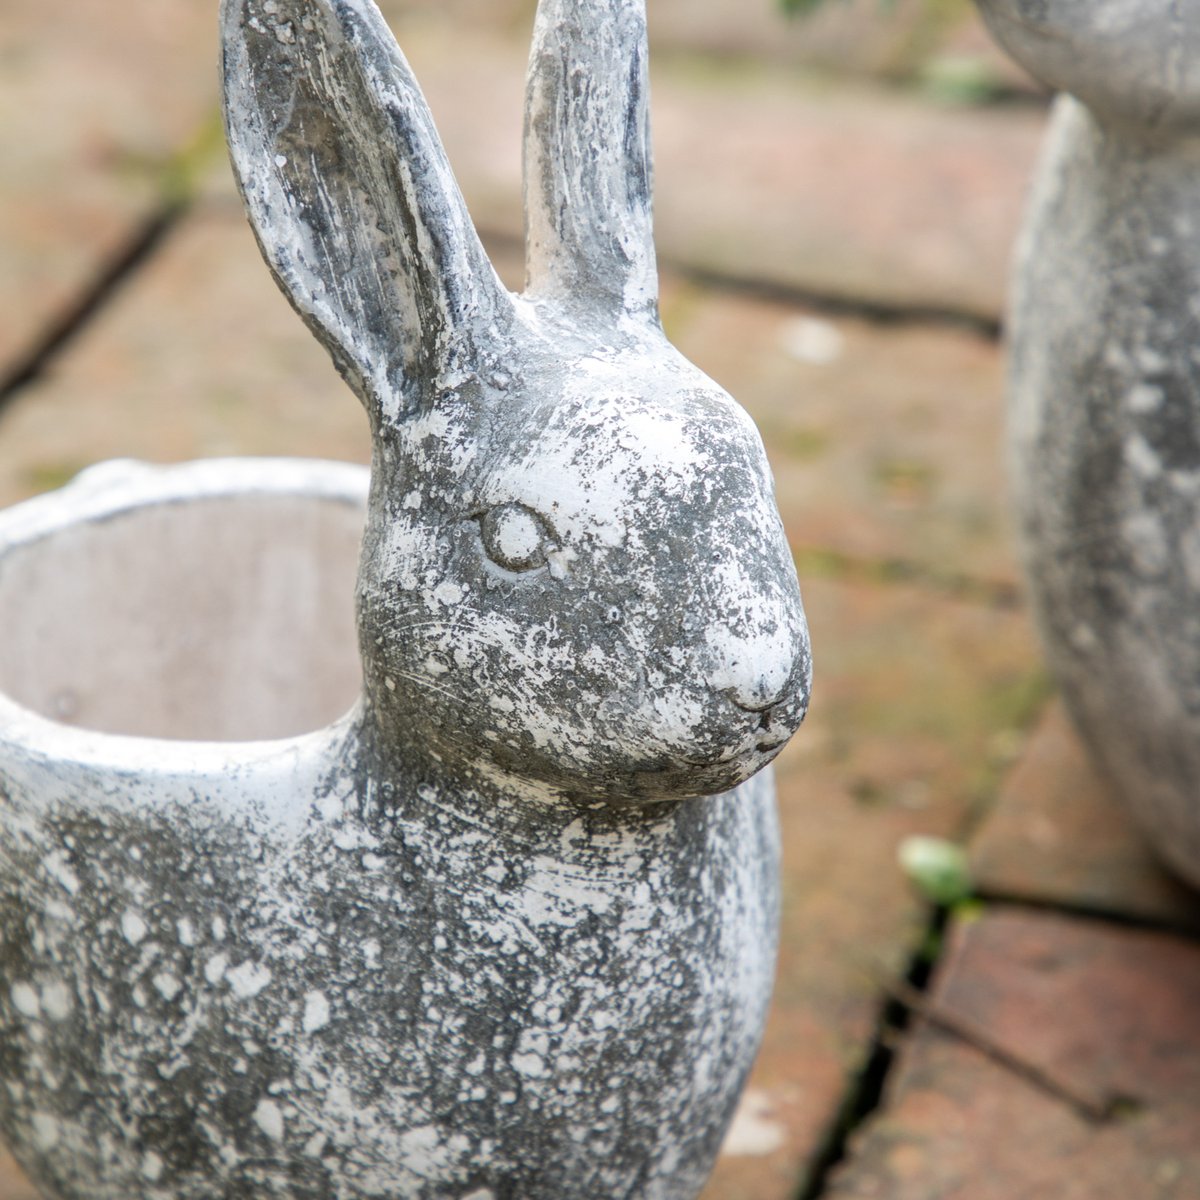 Looking for a great #Eastergift? 🐰🌿
🆕 Pots, Planters & Garden Ornaments
Suitable for both indoor/outdoor use, ideal Décor for #patios, decking, gardens, #summerhouses, #conservatories & orangeries. 
ℹ️ alfrescogardenfurniture.co.uk/accessories/po…

#easter2023
#eastergiftideas
#gardenideas